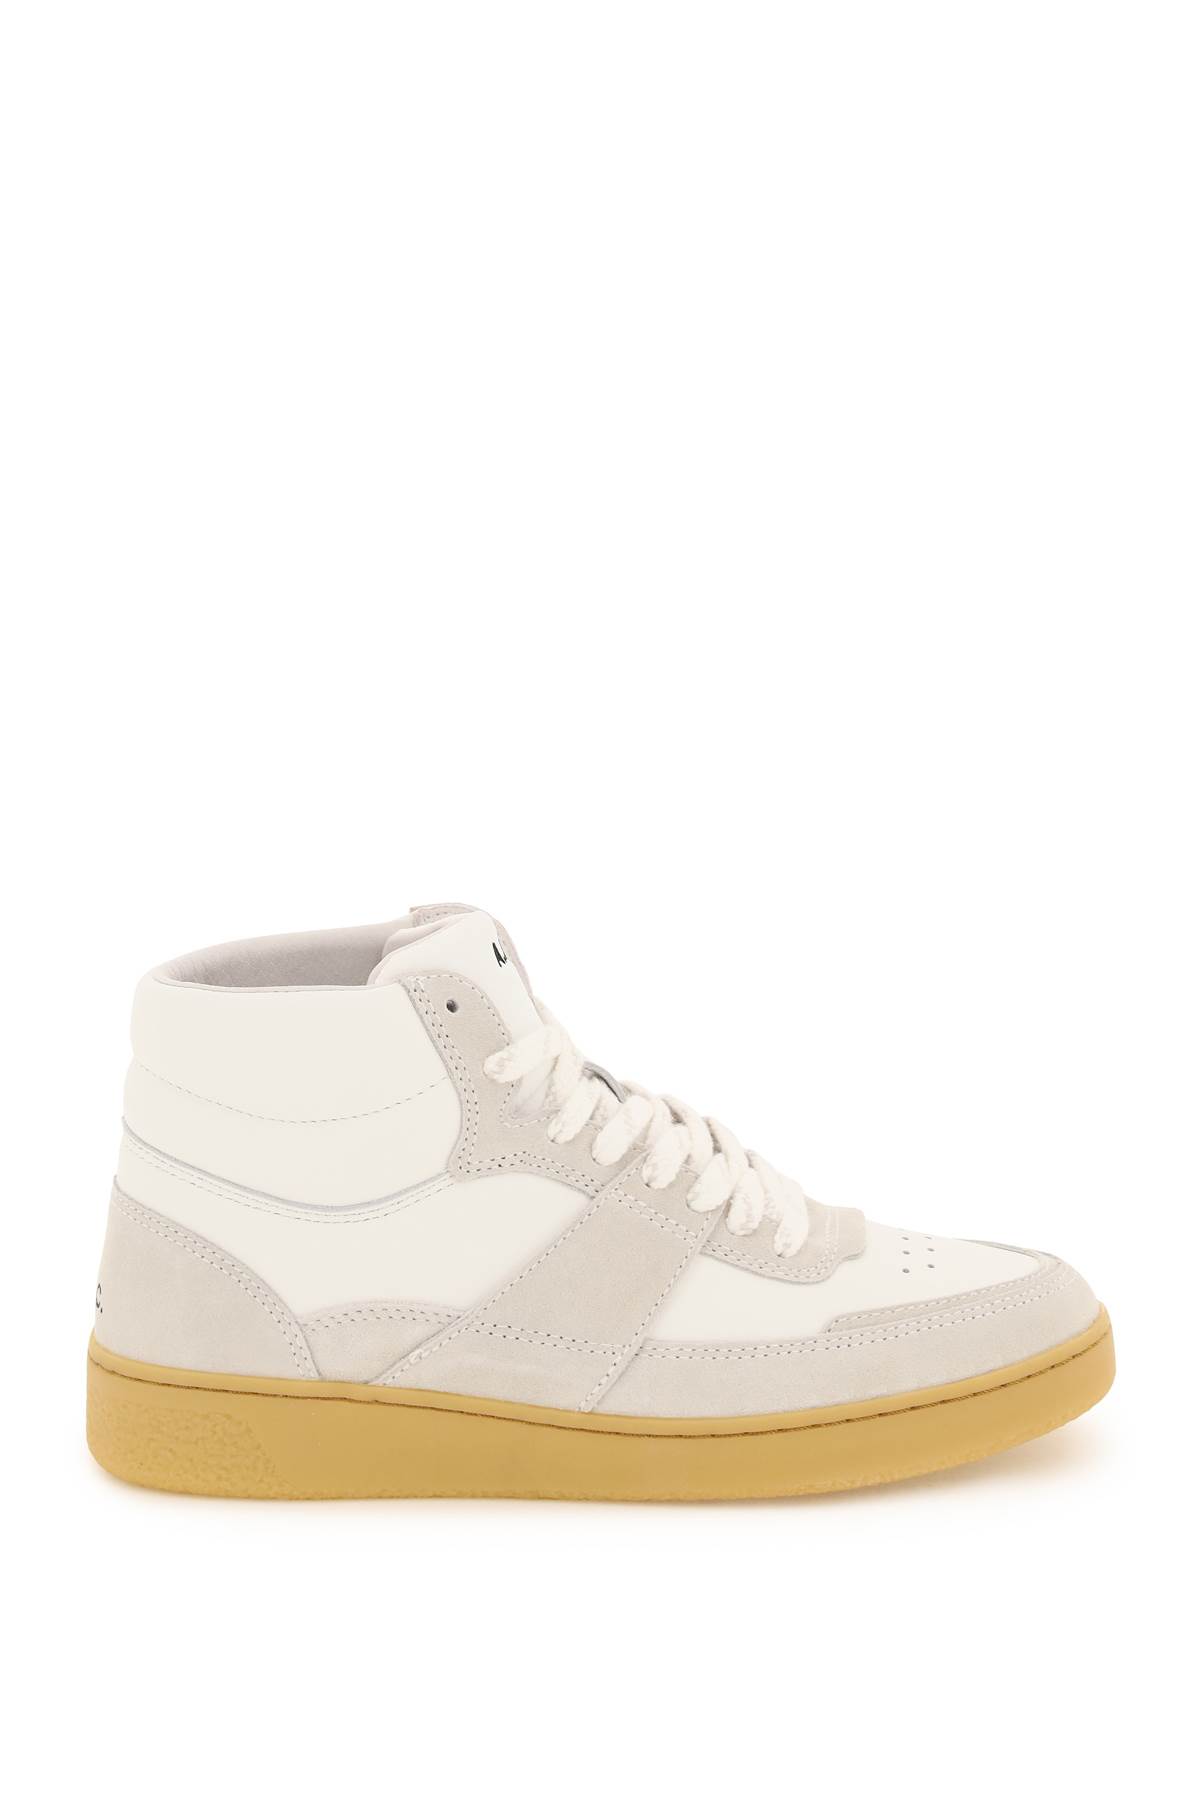 A.P.C. Leather plain High Sneakers